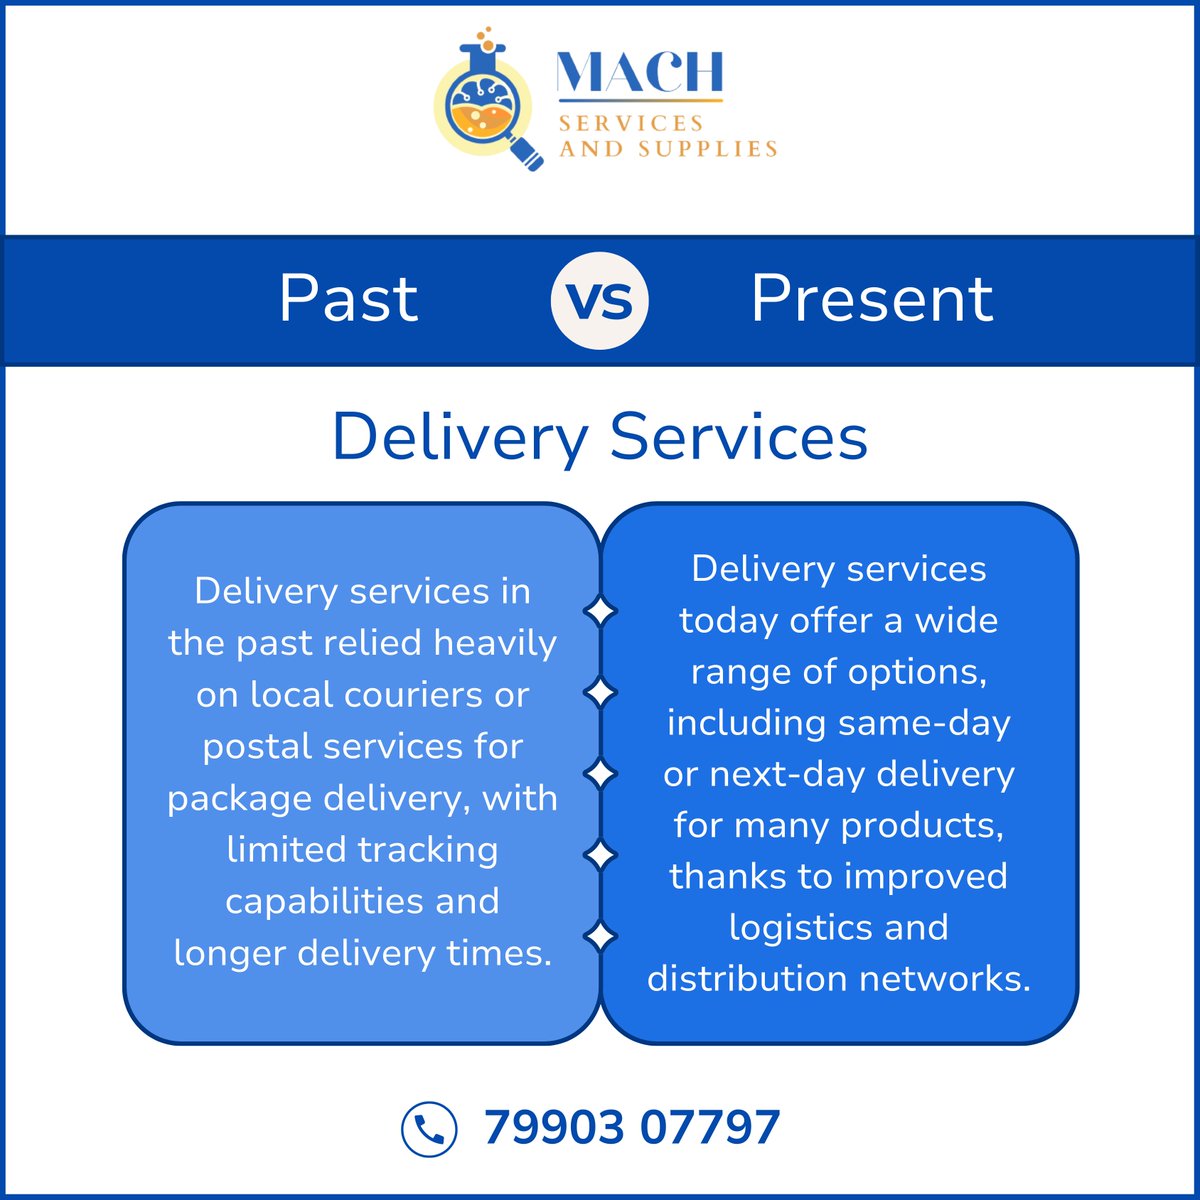 Delivery Services in Past vs Present.
.
.
#delivery #machservicesandsupplies #machservices #deliveryservice #style #love #instagood #like #photography #motivation #motivationalquotes #inspiration #surat #suratcity #suratfood #suratphotoclub #sunofcitysurat #sürat #wearehiring